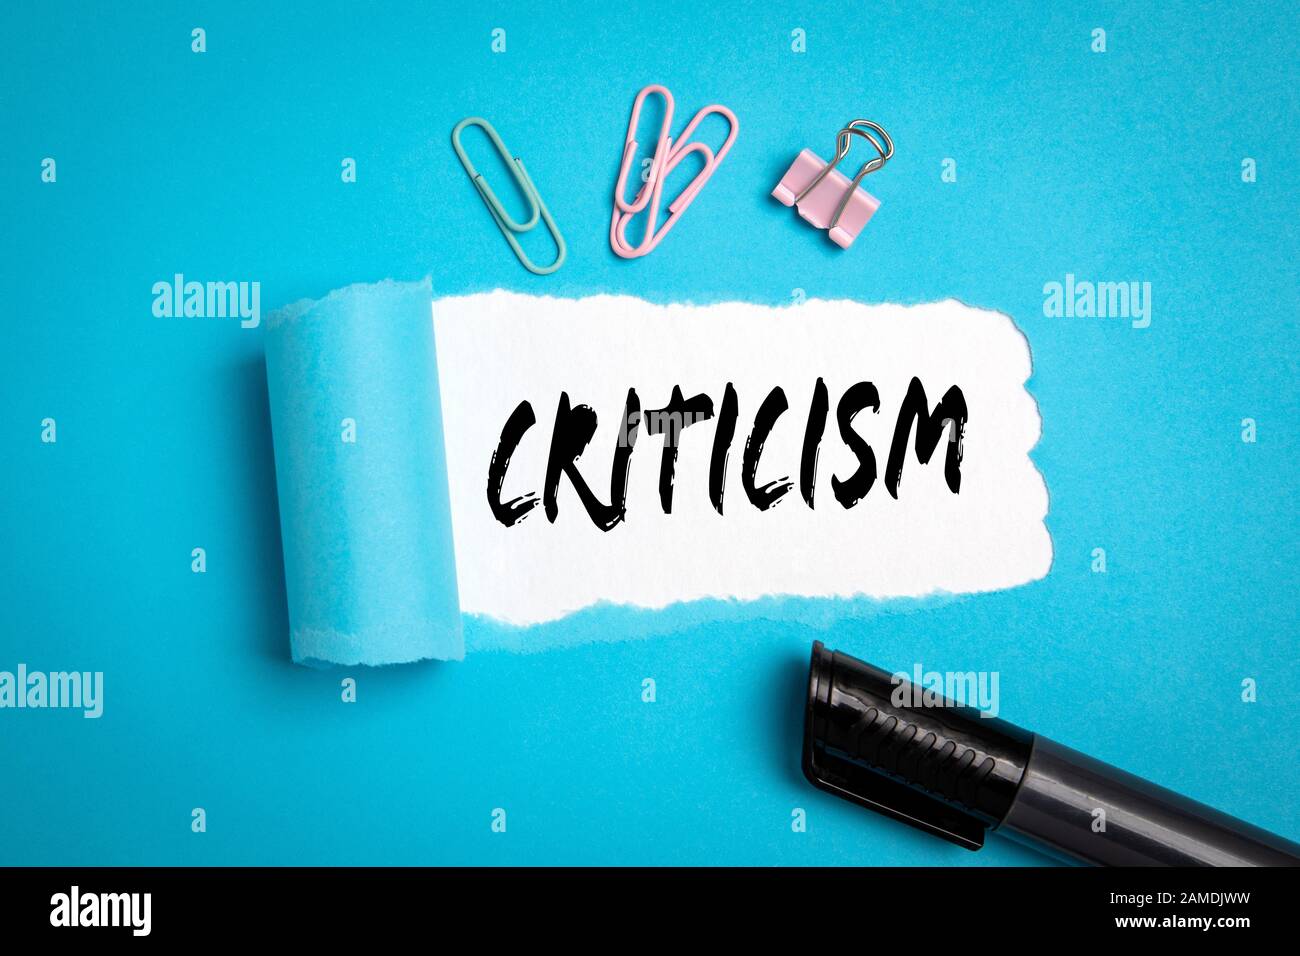 Criticism. Diversity of views, beliefs, thoughts and disagreements concept. Text under torn paper Stock Photo